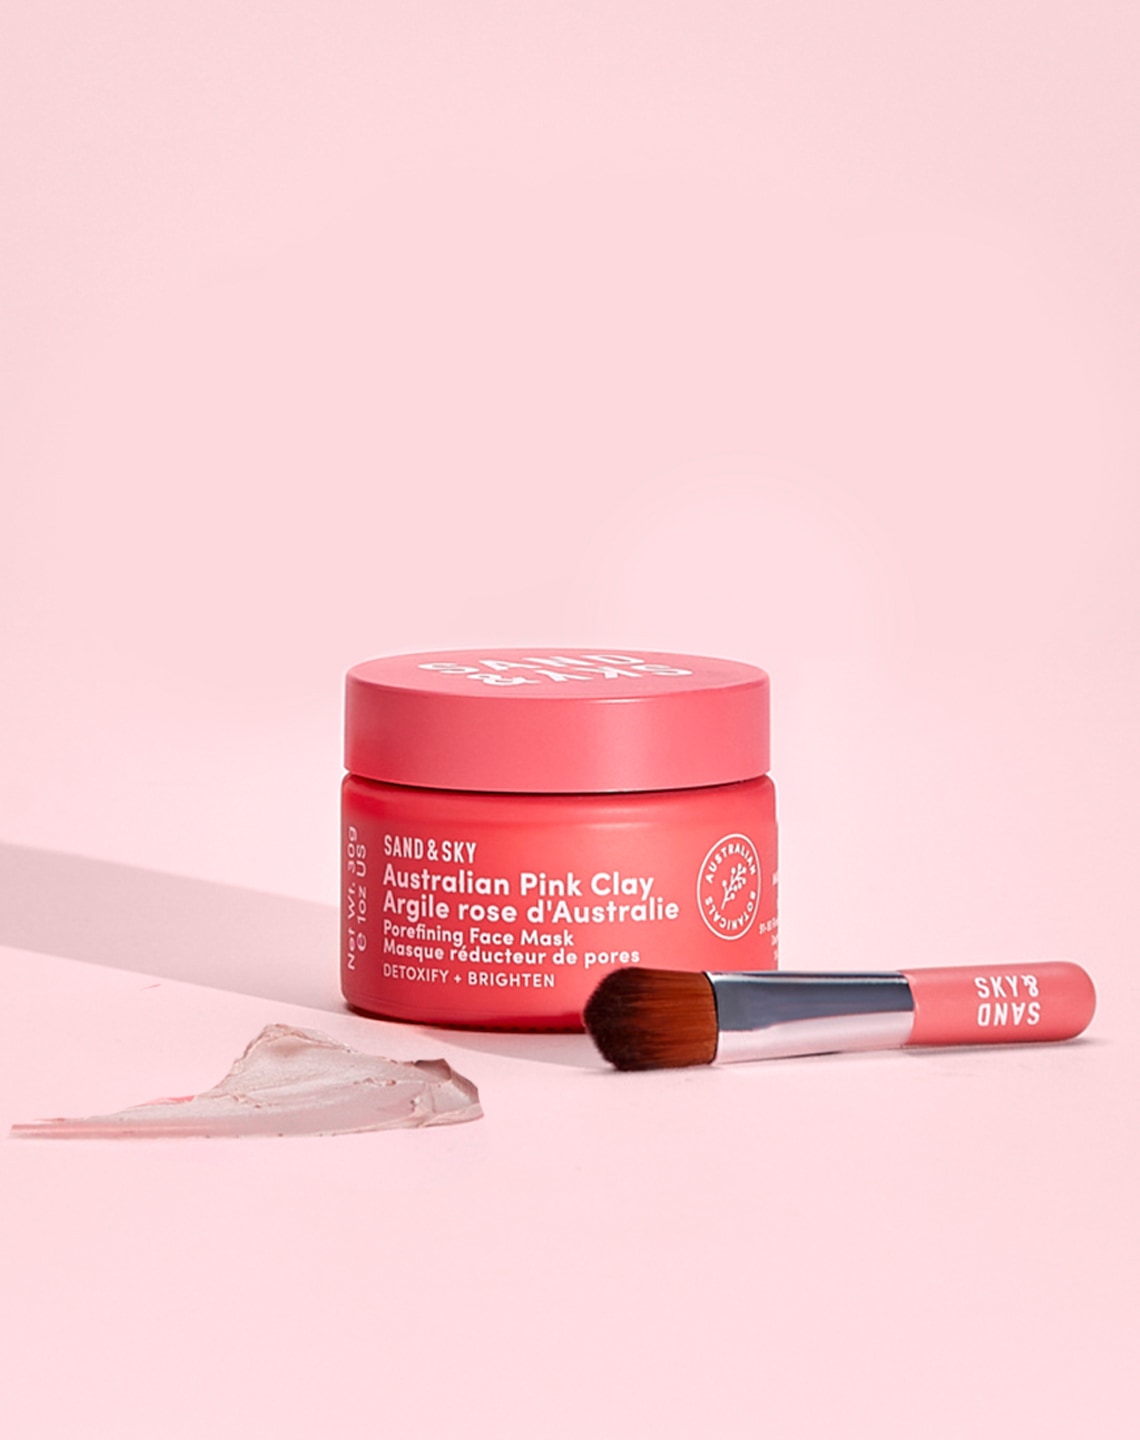 Australian Pink Clay Face Mask Travel Size